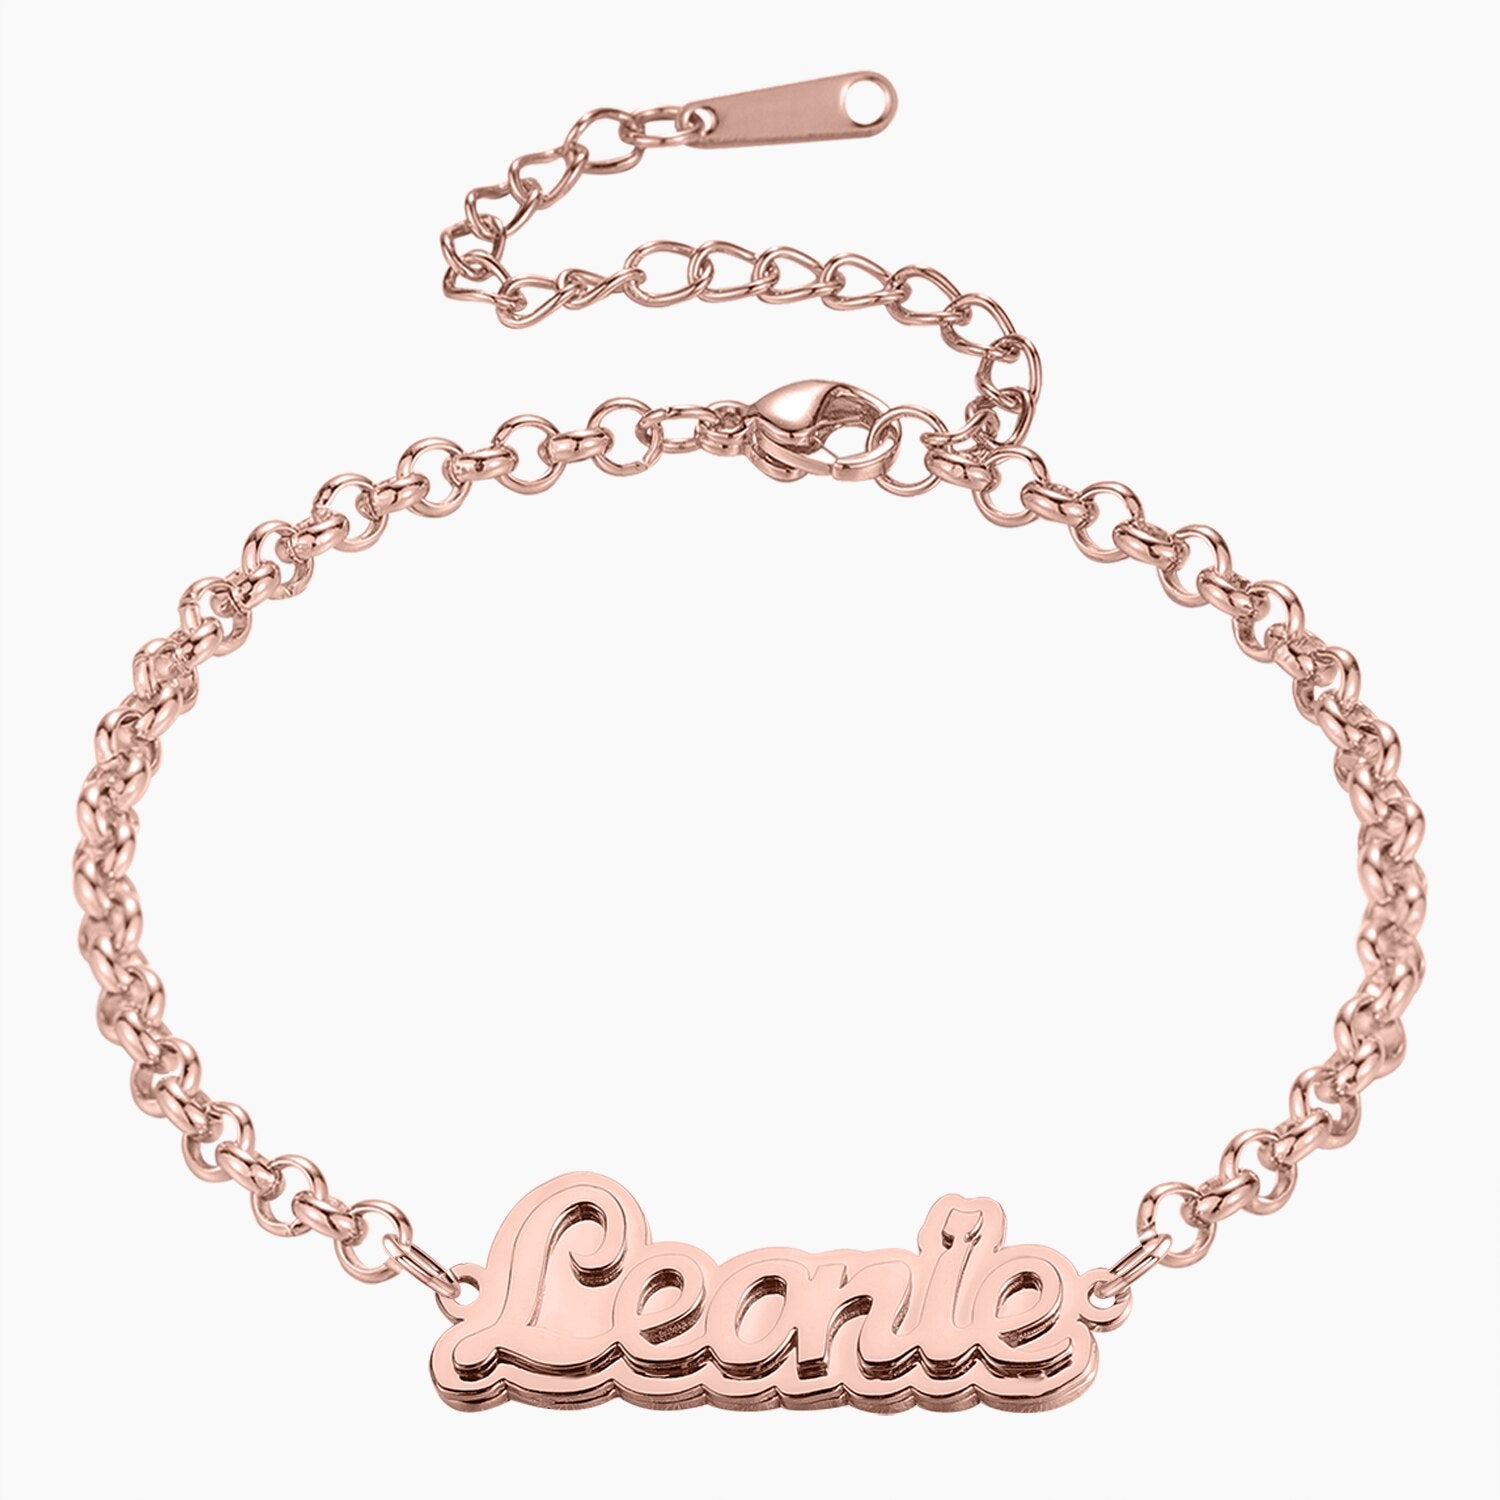 Personalised Magnetic Healing Therapy Bracelet rose gold